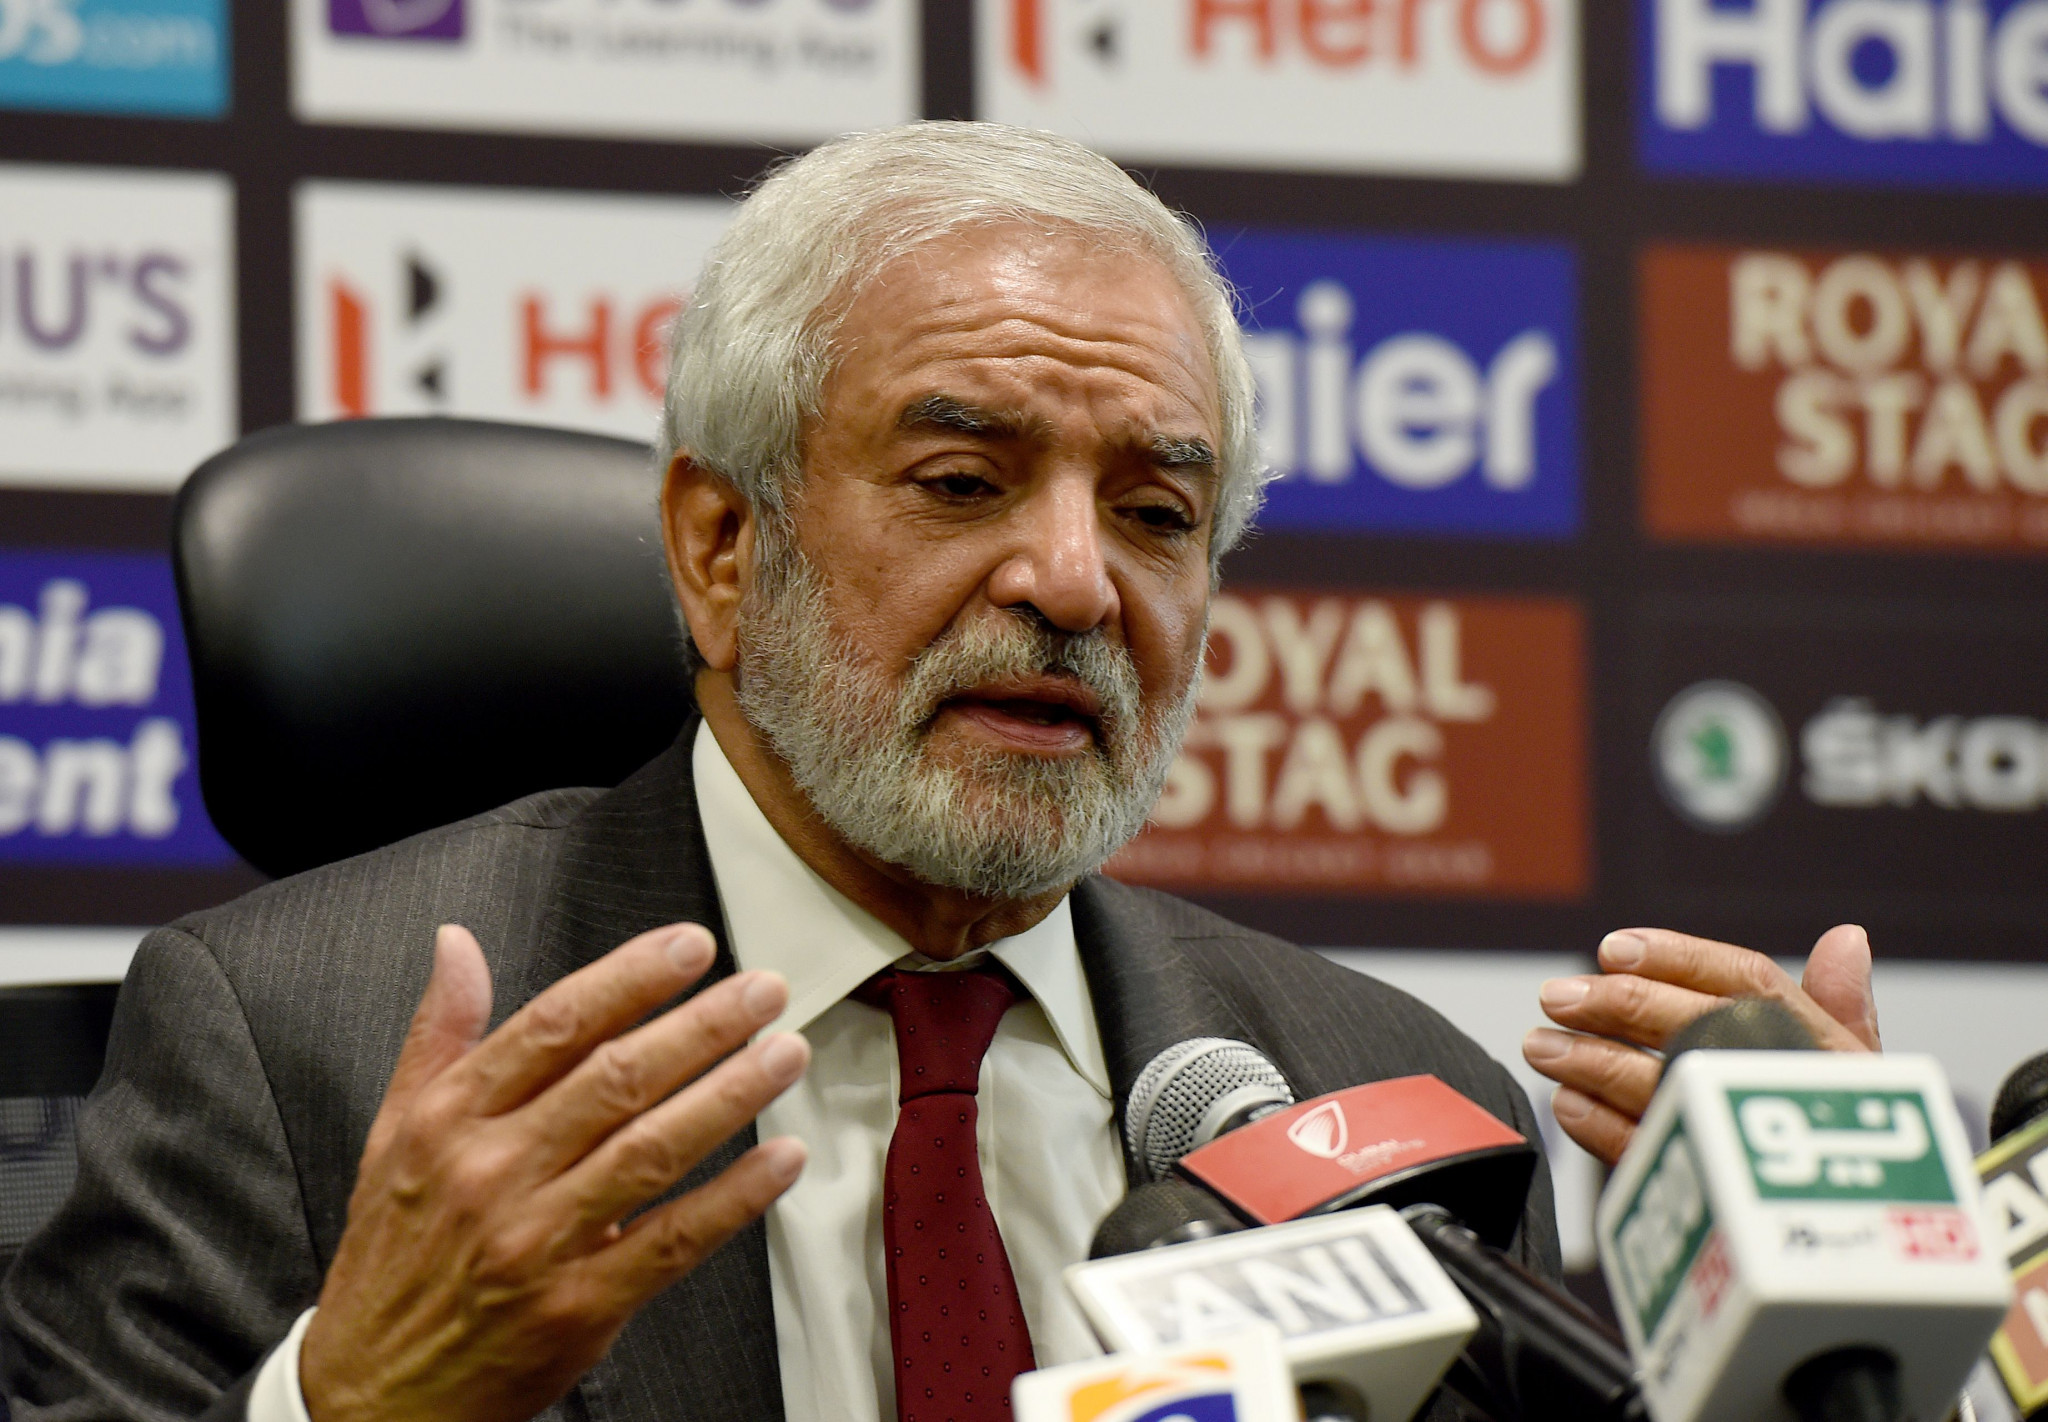 PCB chairman Ehsan Mani claims domestic clubs need to ensure women's cricket grows alongside the men's game ©Getty Images